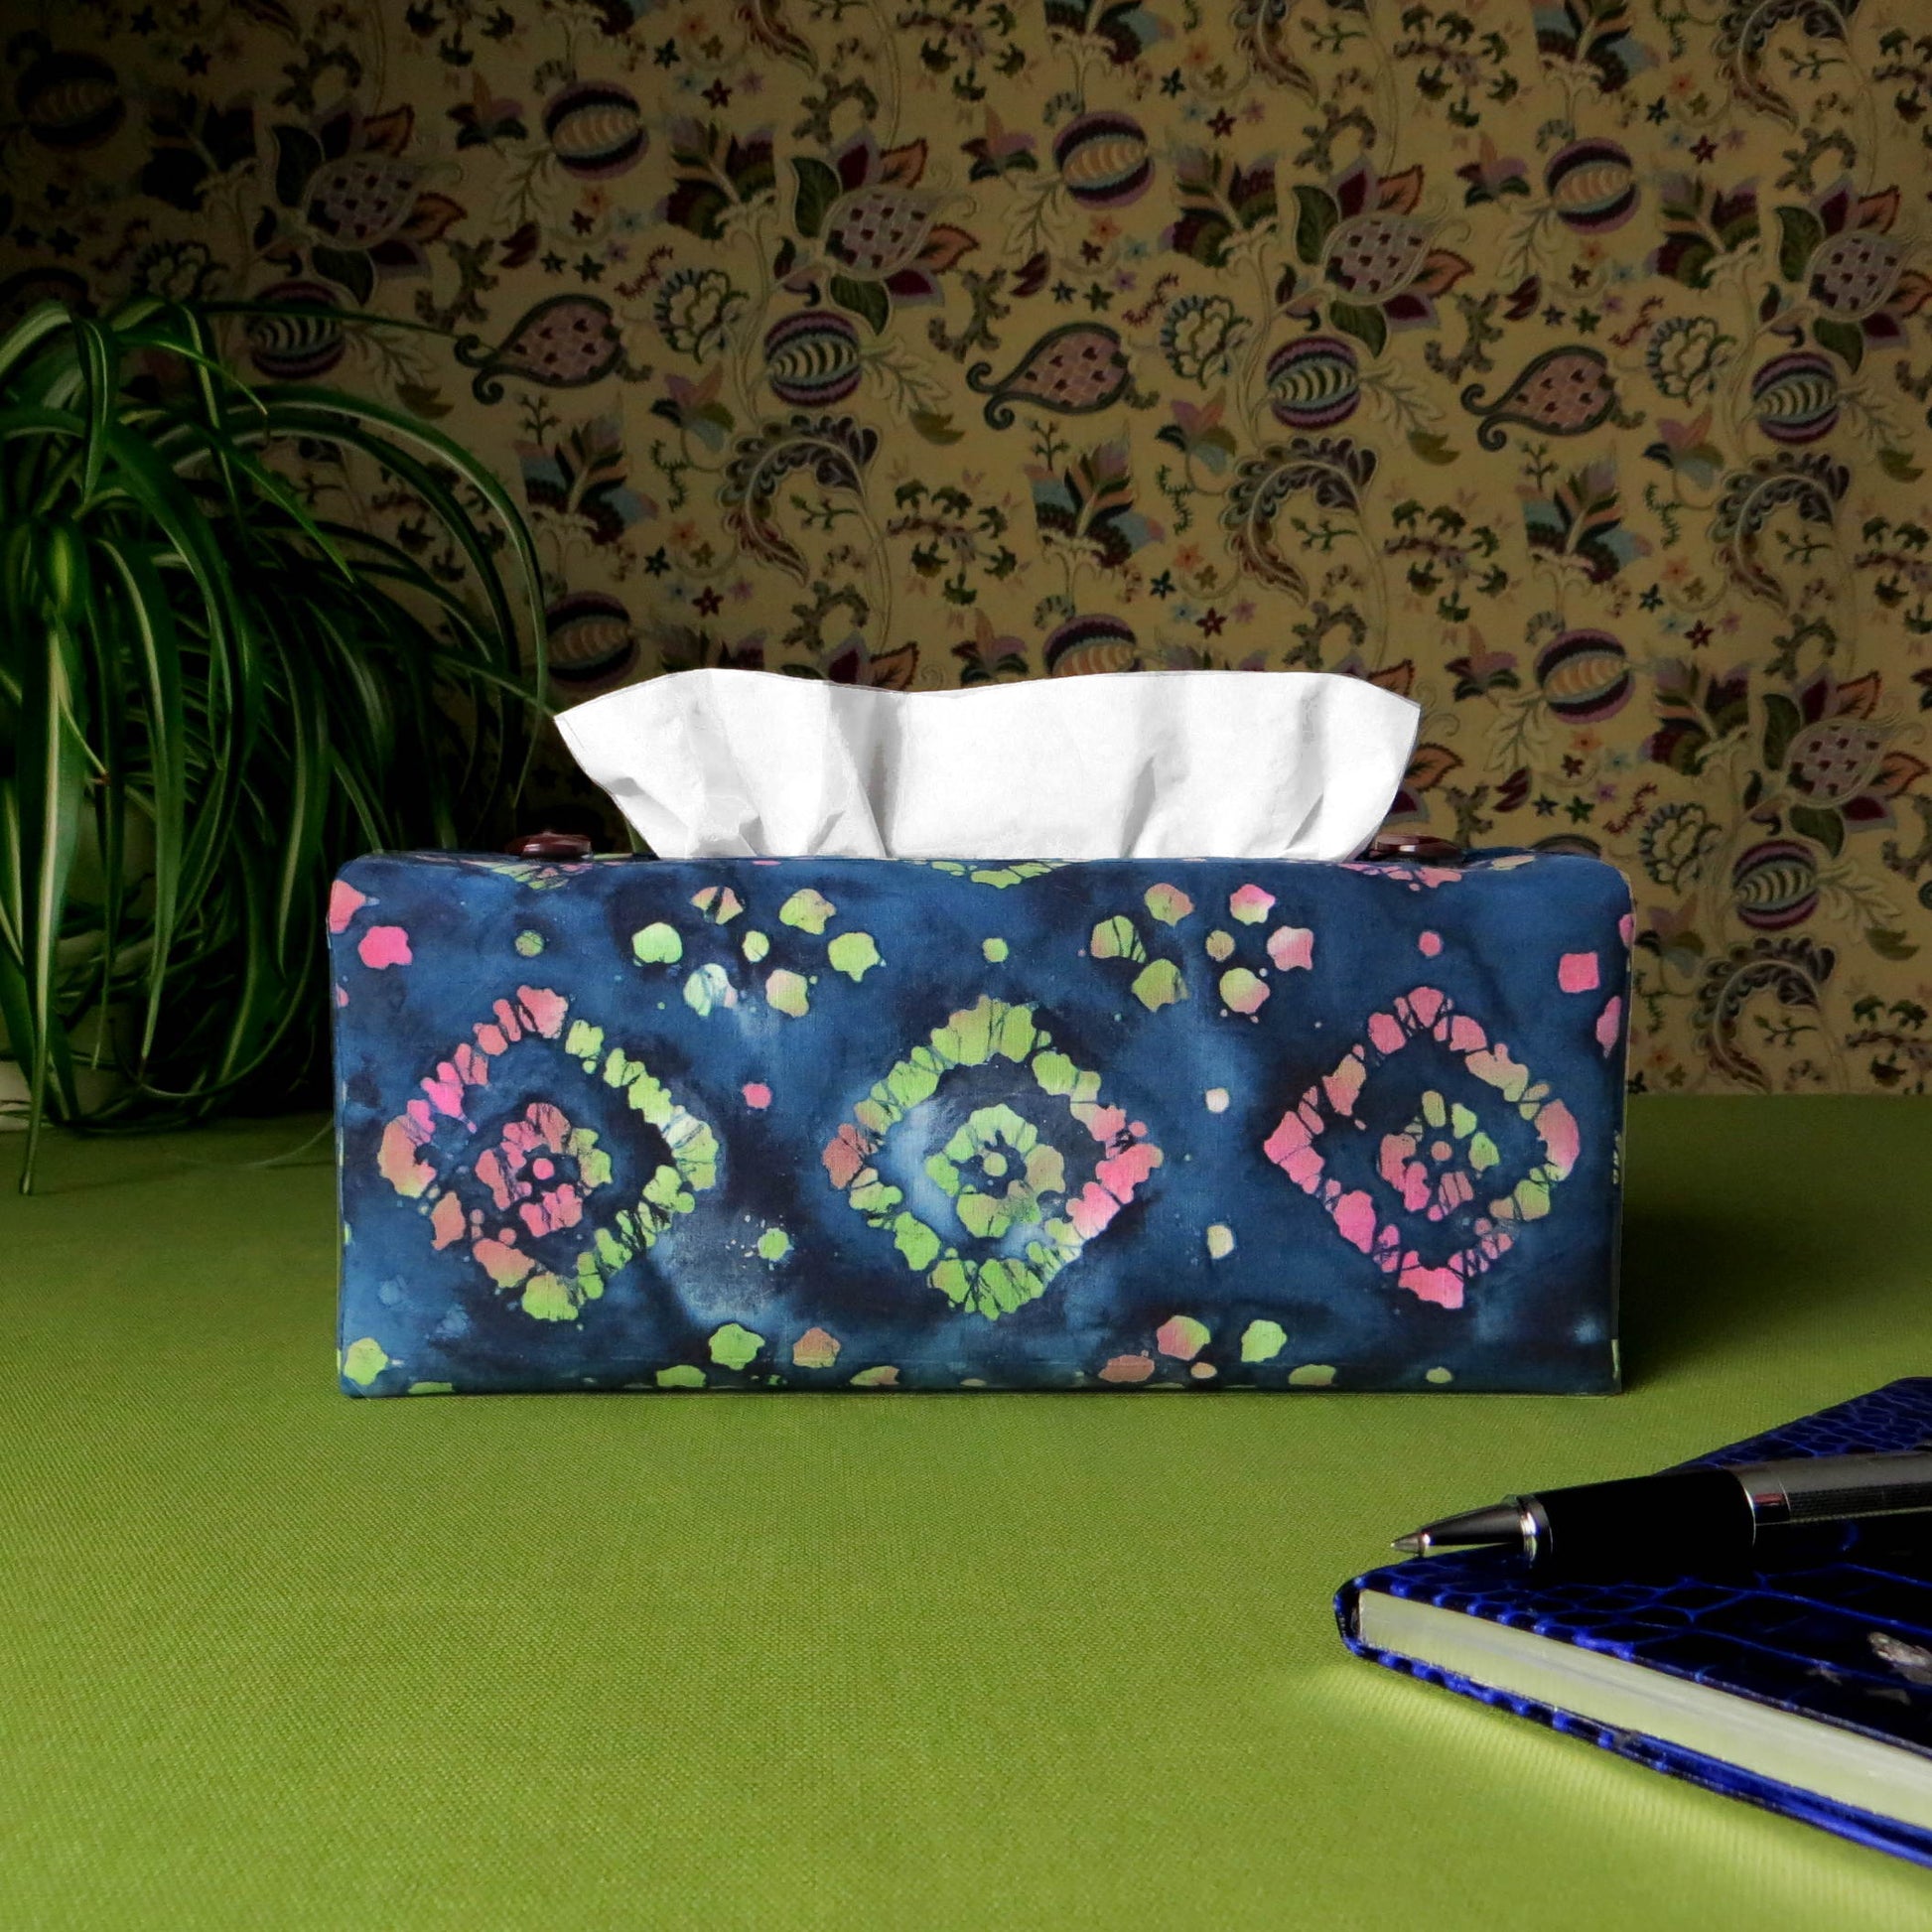 Batik printed cotton rectangle tissue box cover with tie dye magenta and green diamond design on blue background